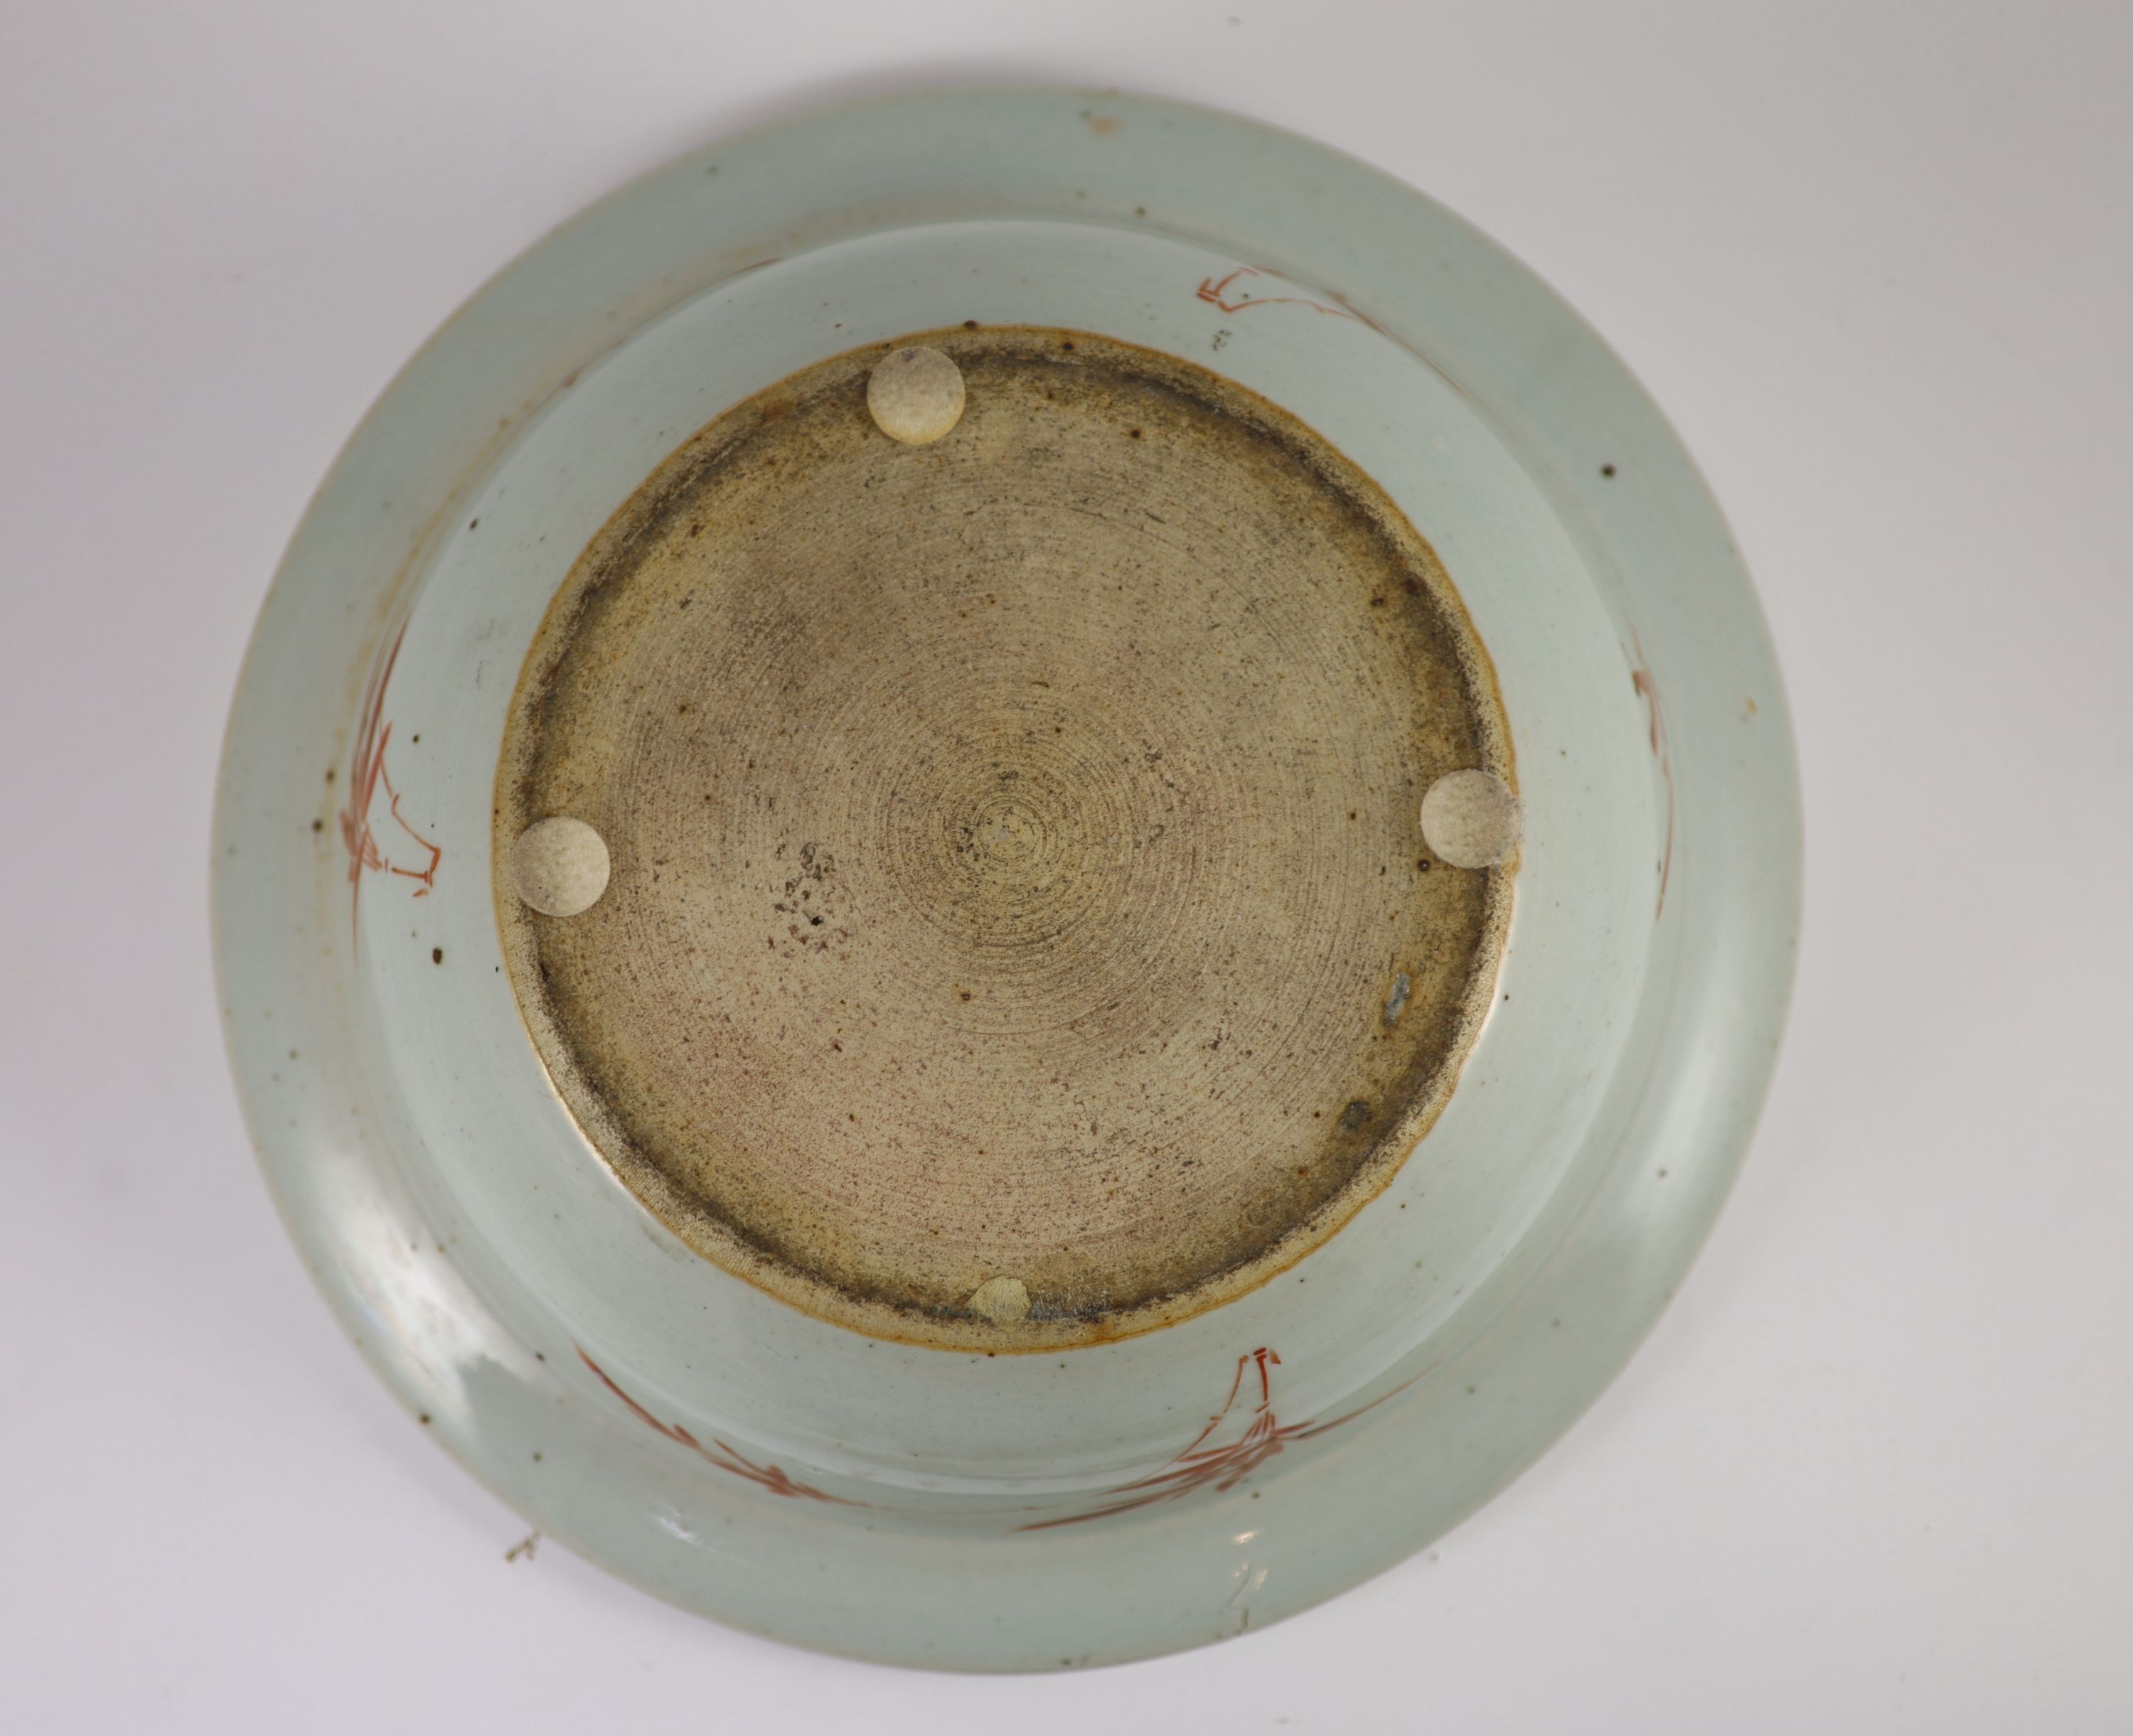 A Chinese famille rose wash basin, mid 19th century, 37.5 cm diameter, over-glazed firing crack